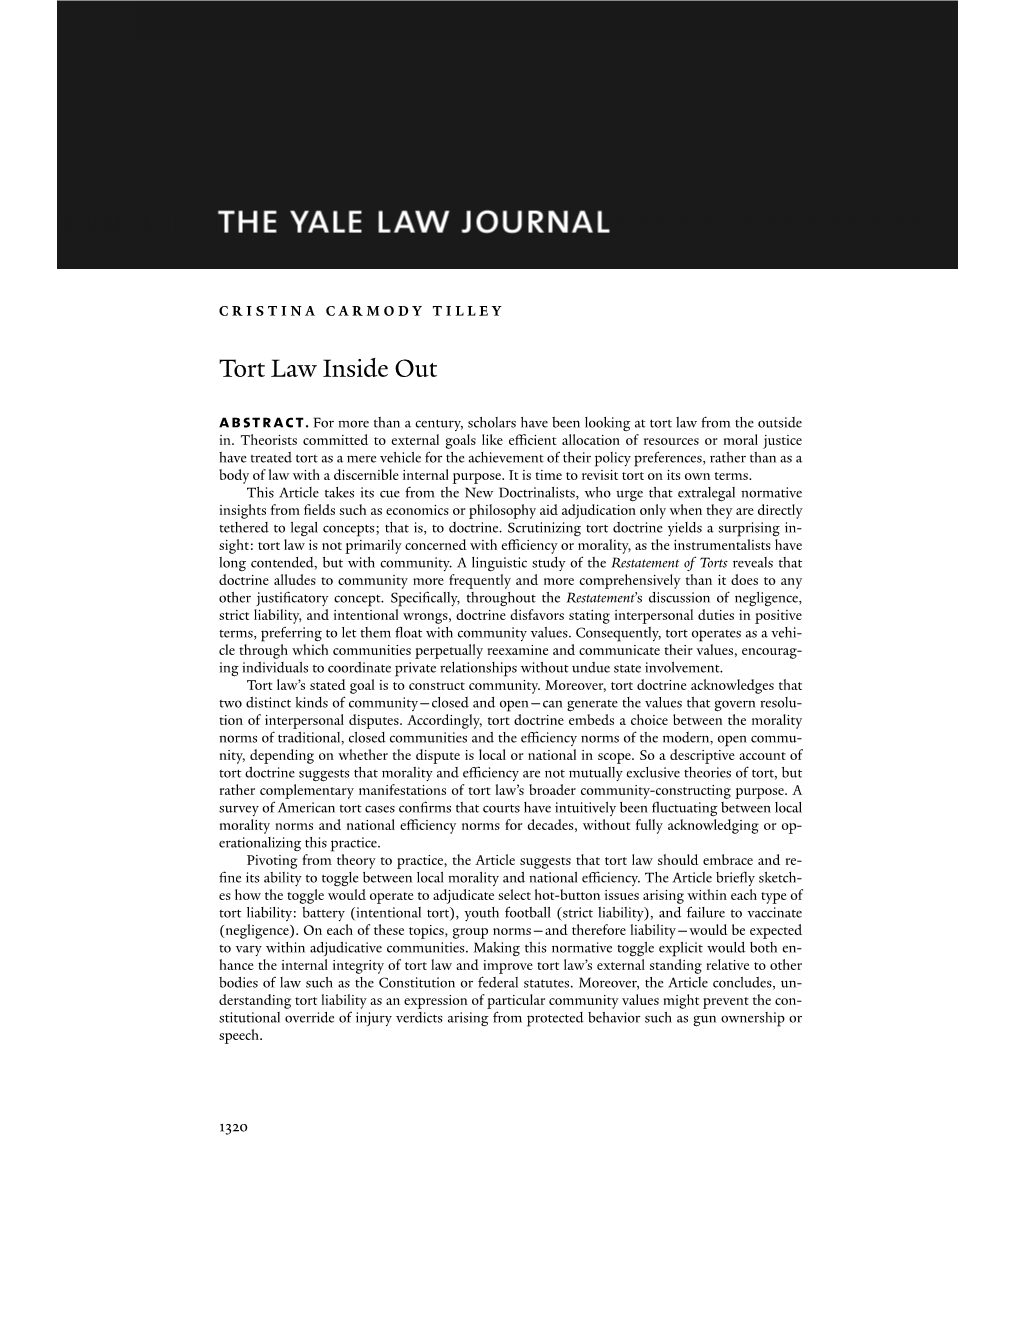 Tort Law Inside out Abstract